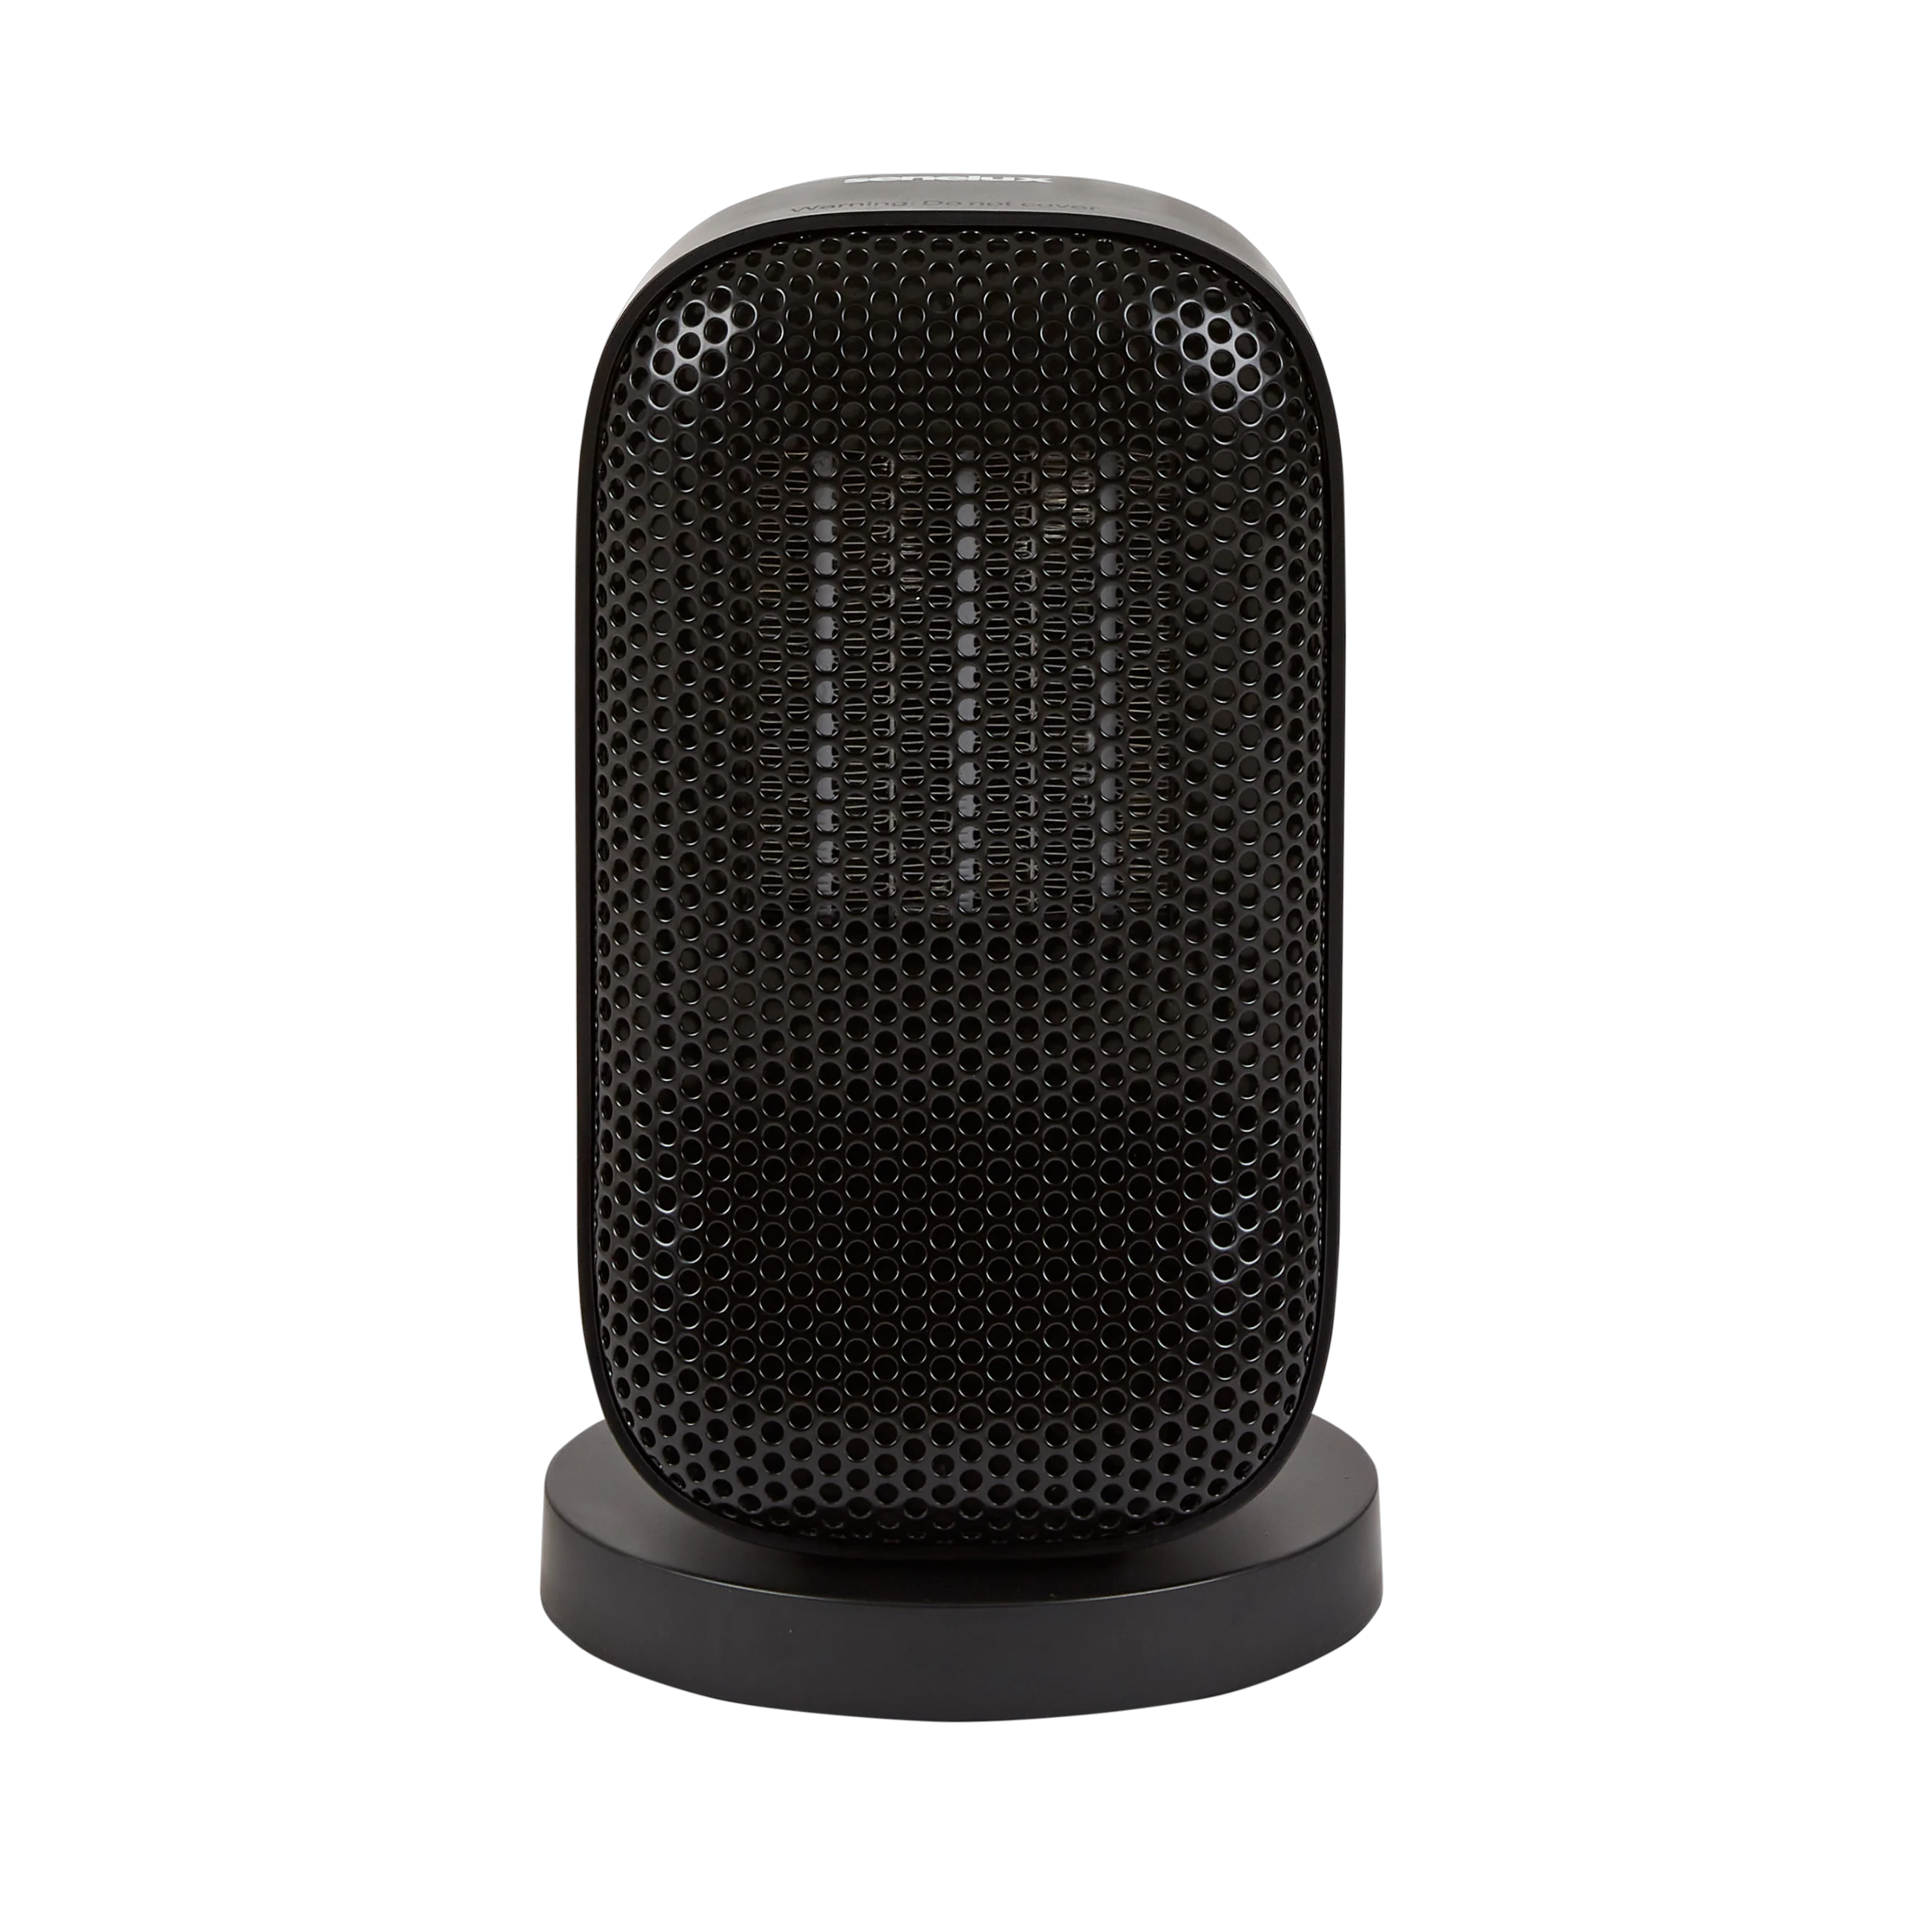 An image of the Senelux Desktop Space heater in all black with the metal heating grill reflecting a warm, shining light.